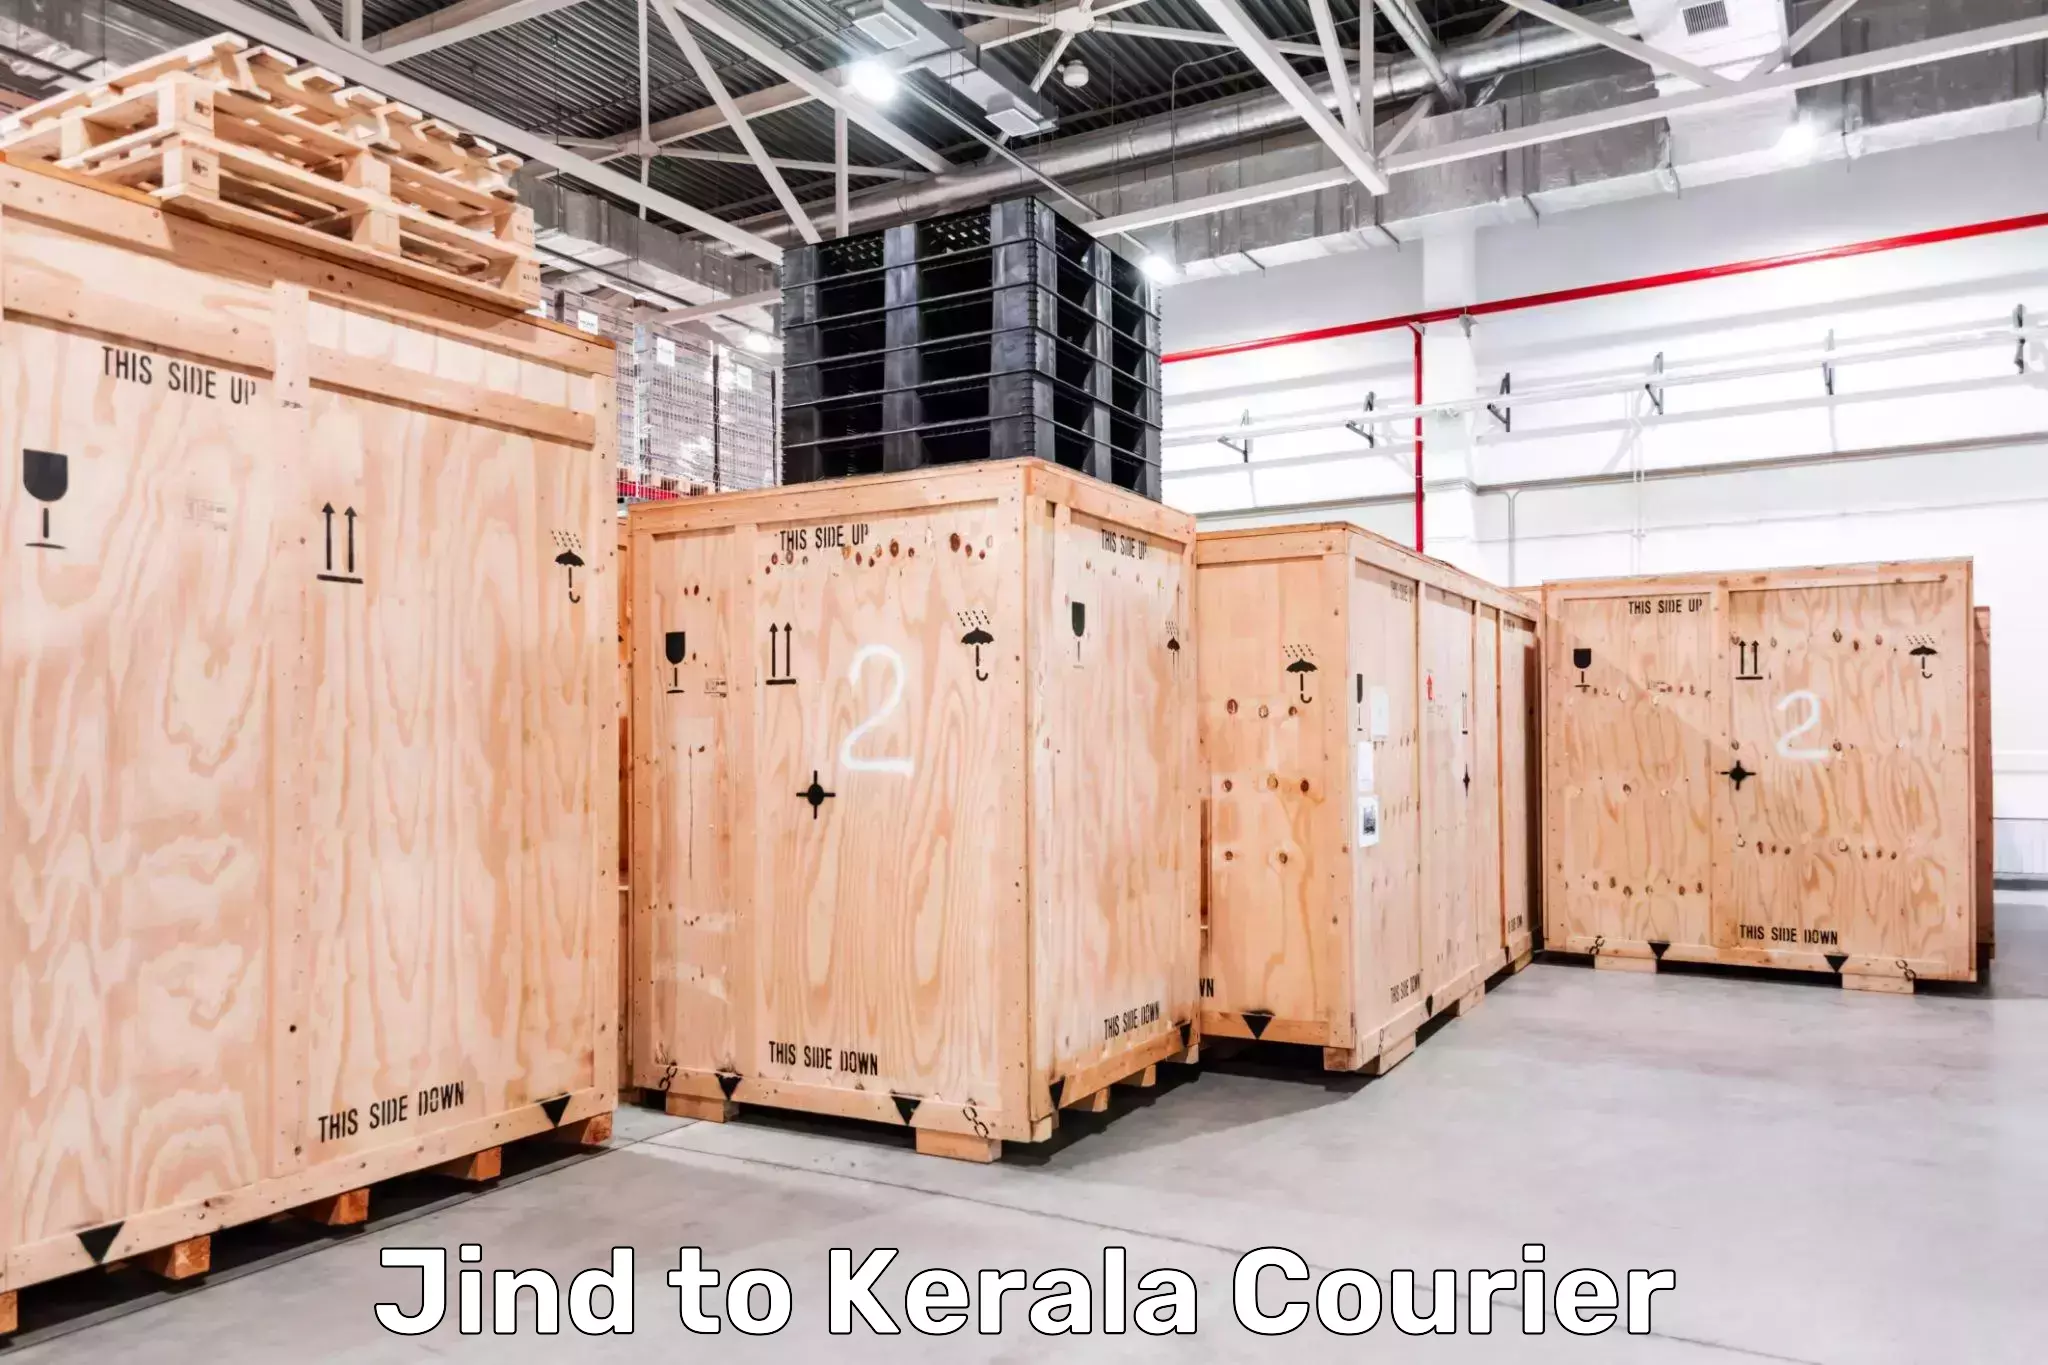 Cash on delivery service Jind to Kerala